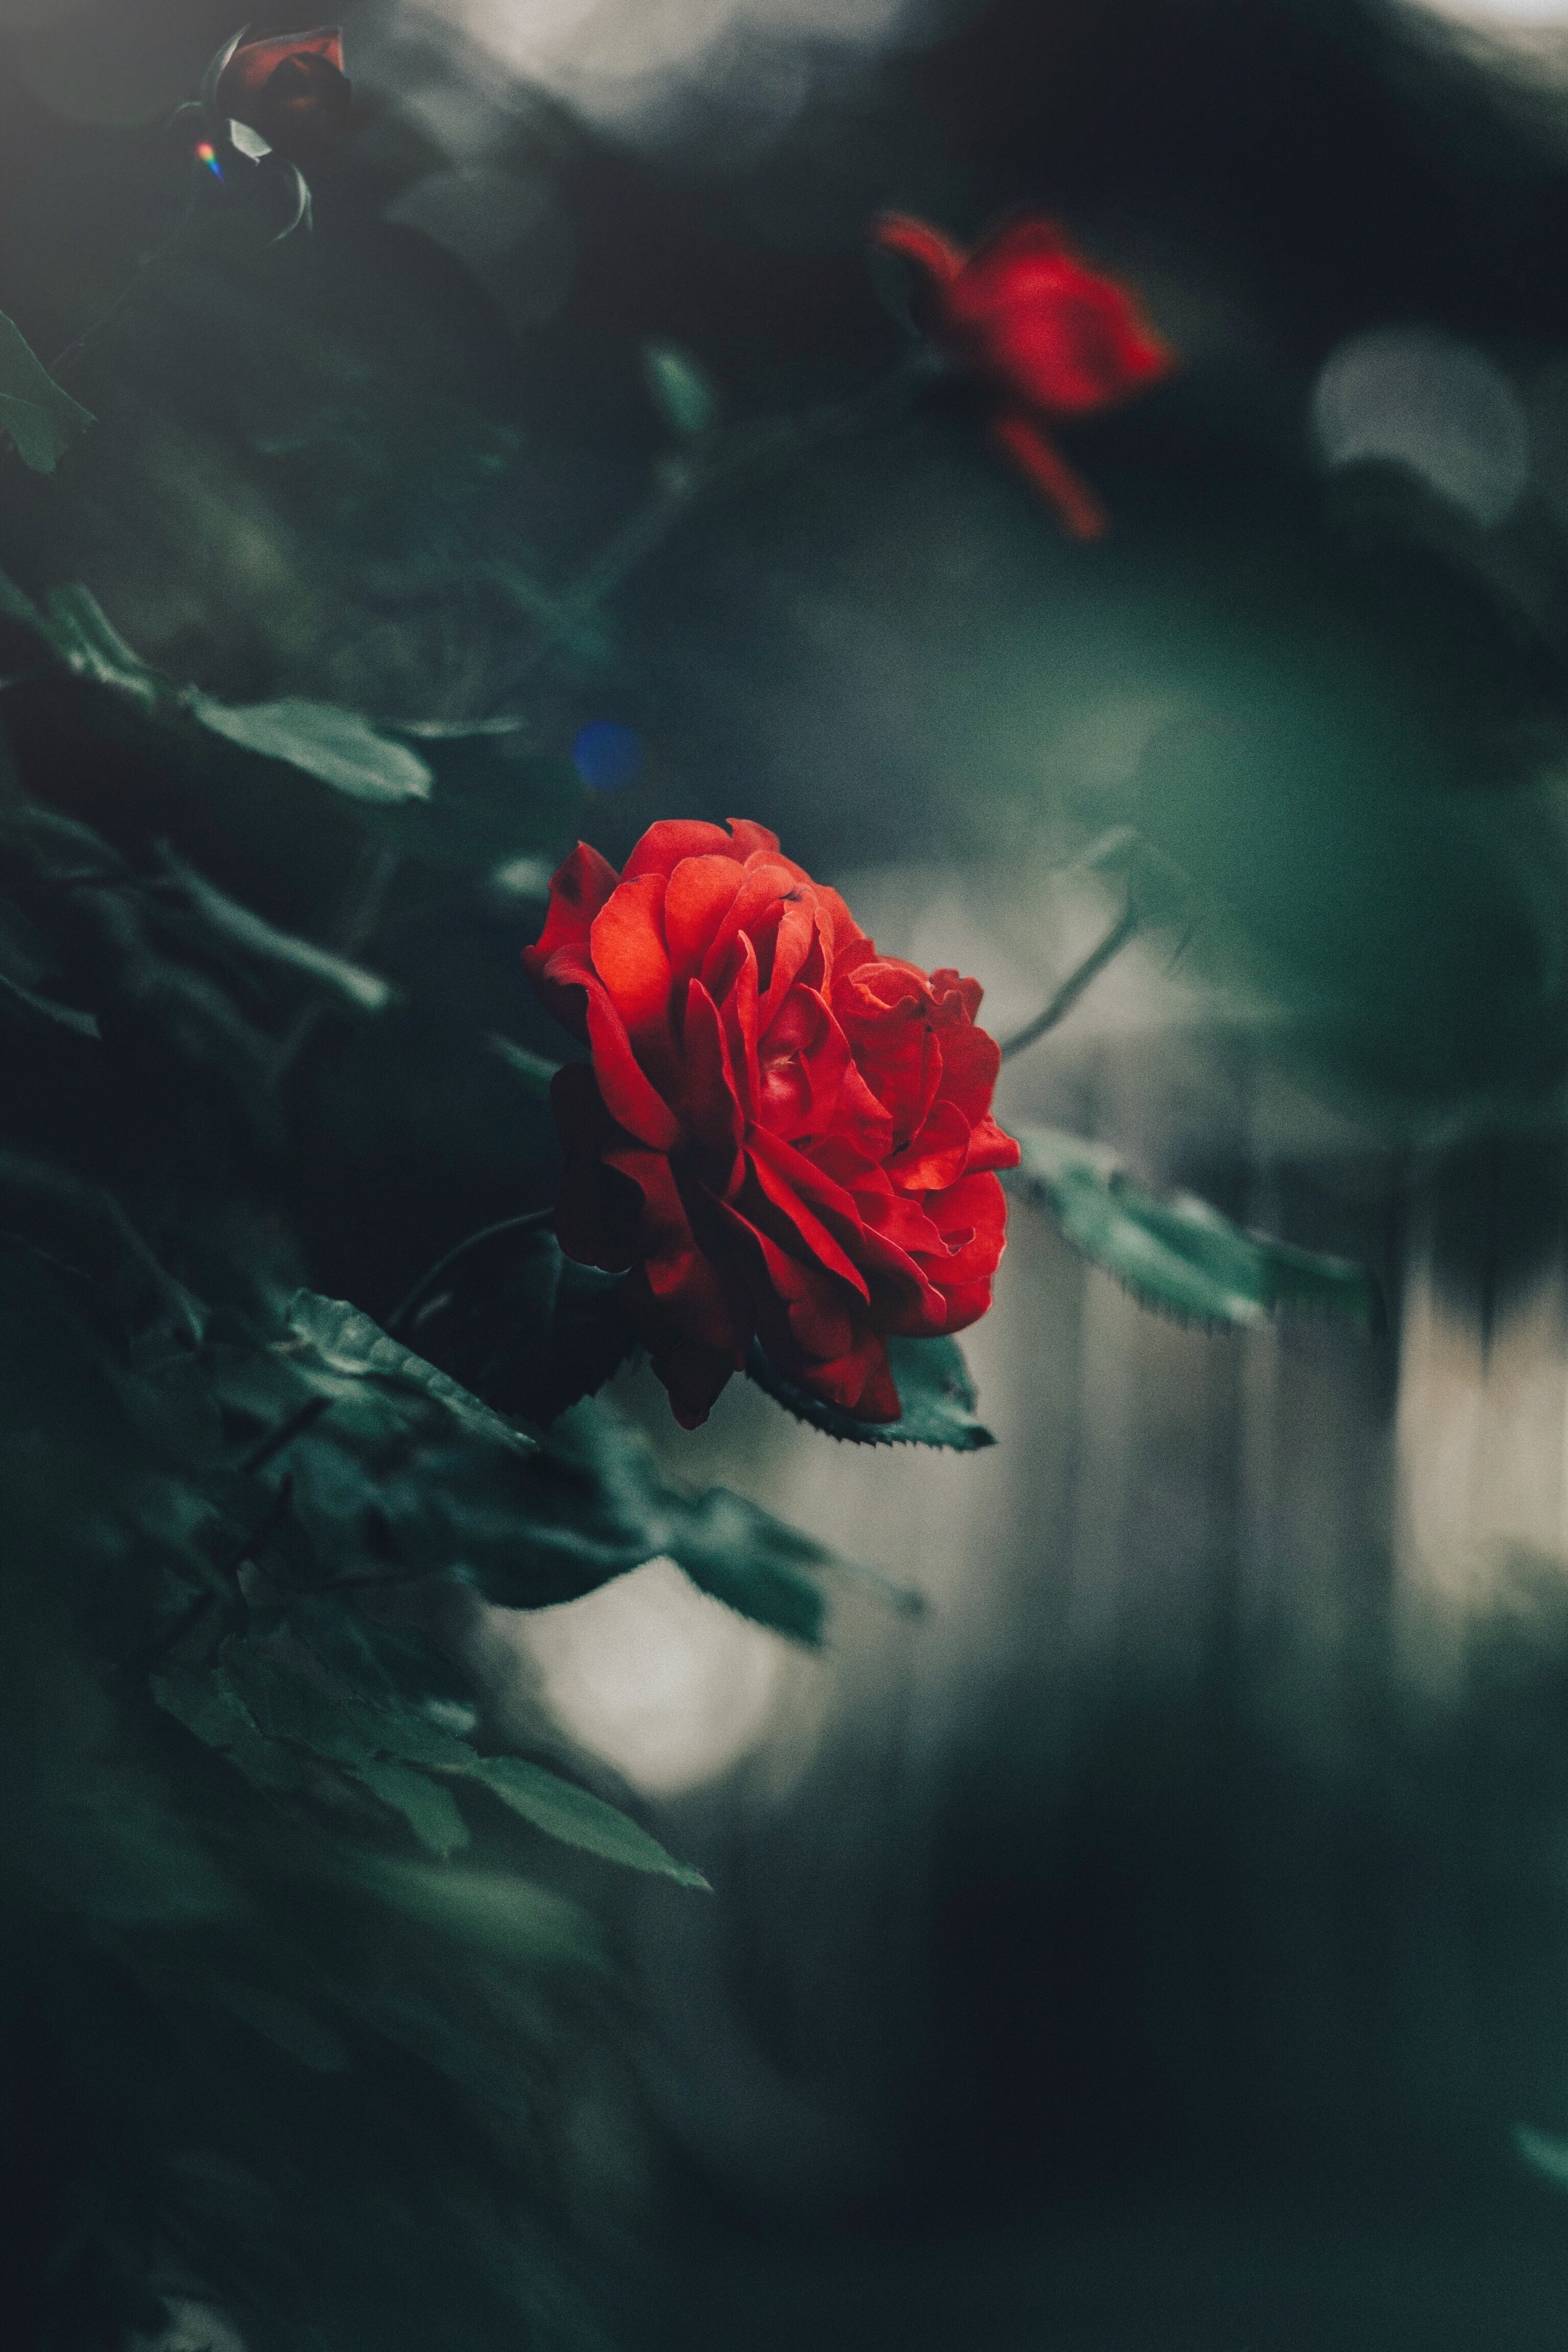 144901 download wallpaper blur, flowers, bush, red, rose flower, rose, bud, smooth, garden screensavers and pictures for free